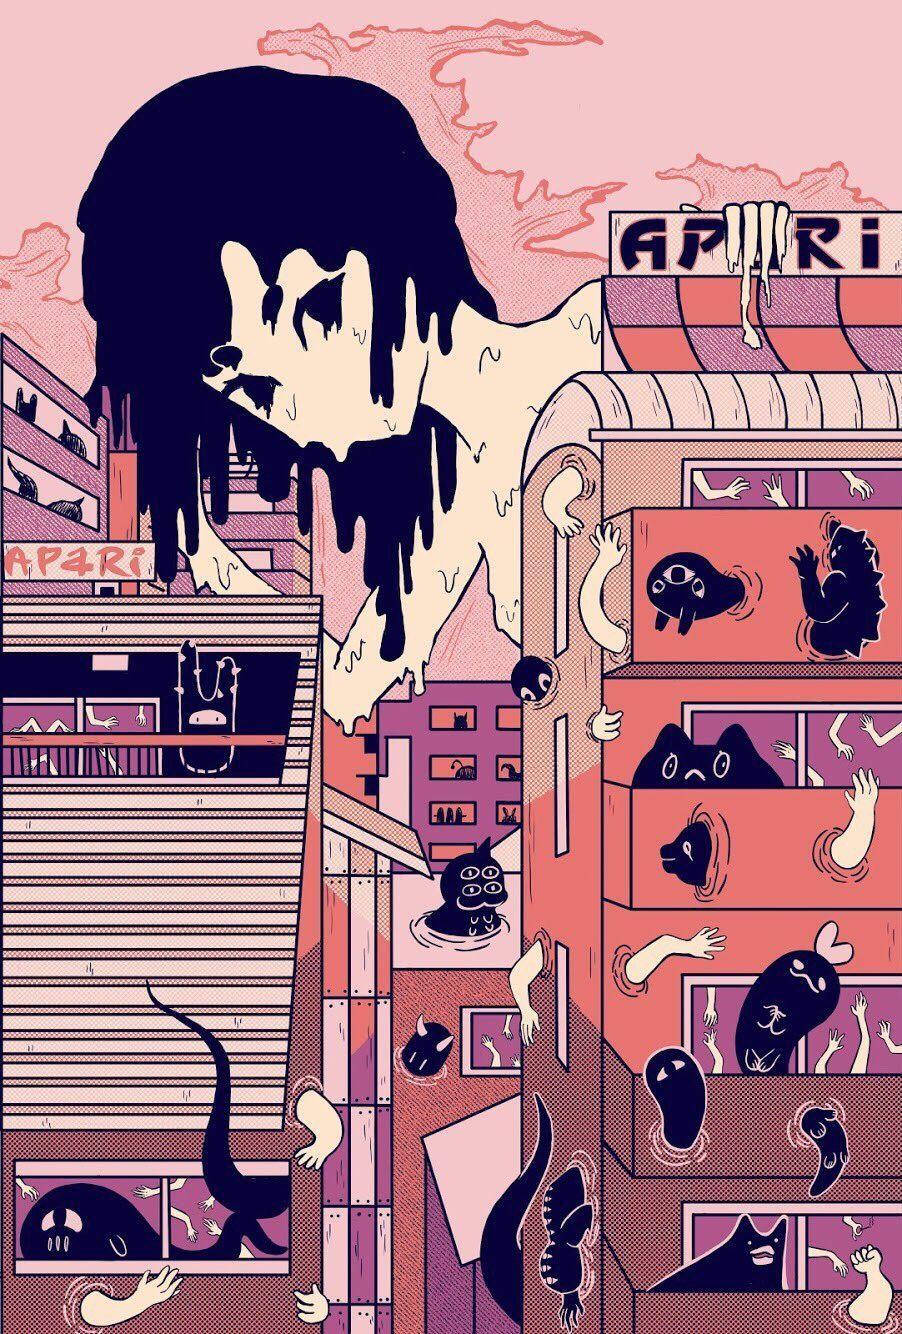 Aesthetic Anime Giant Girl And Ghost Building Phone Wallpaper